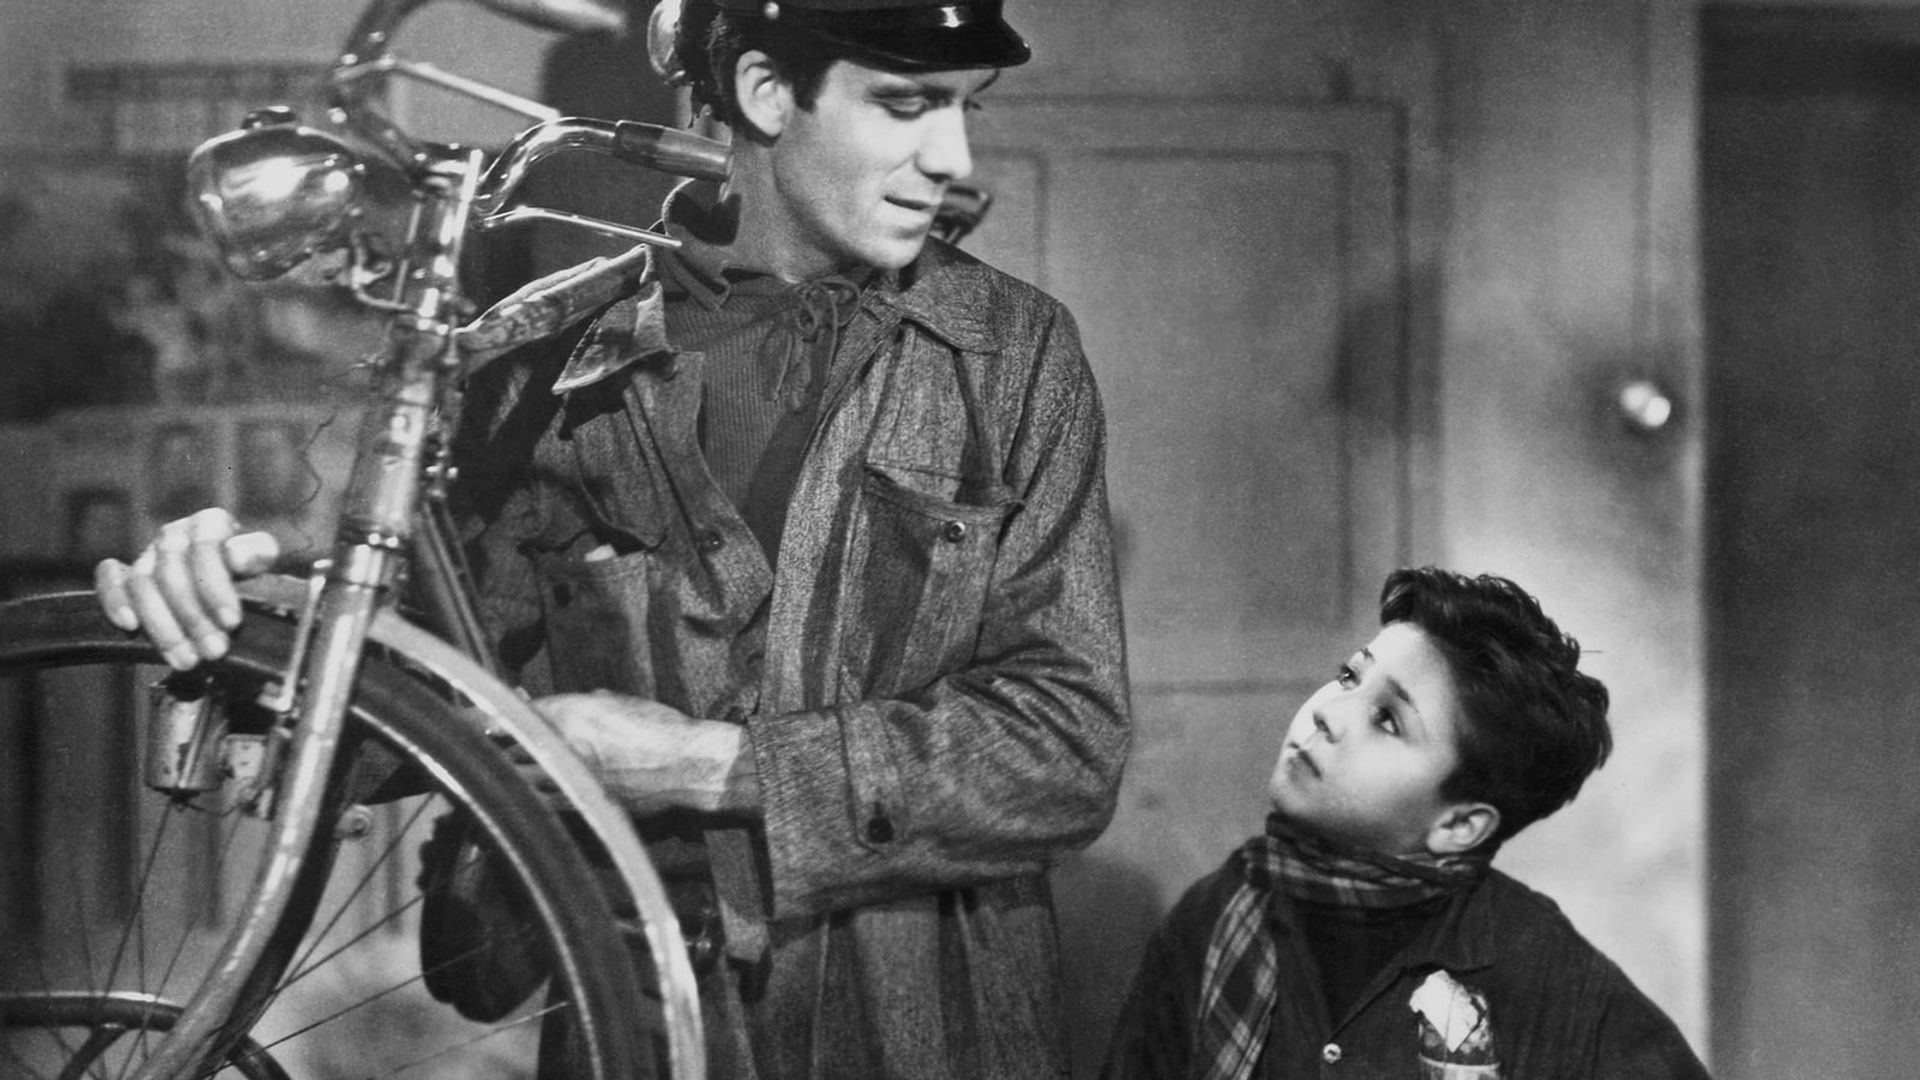 Bicycle Thieves Backdrop